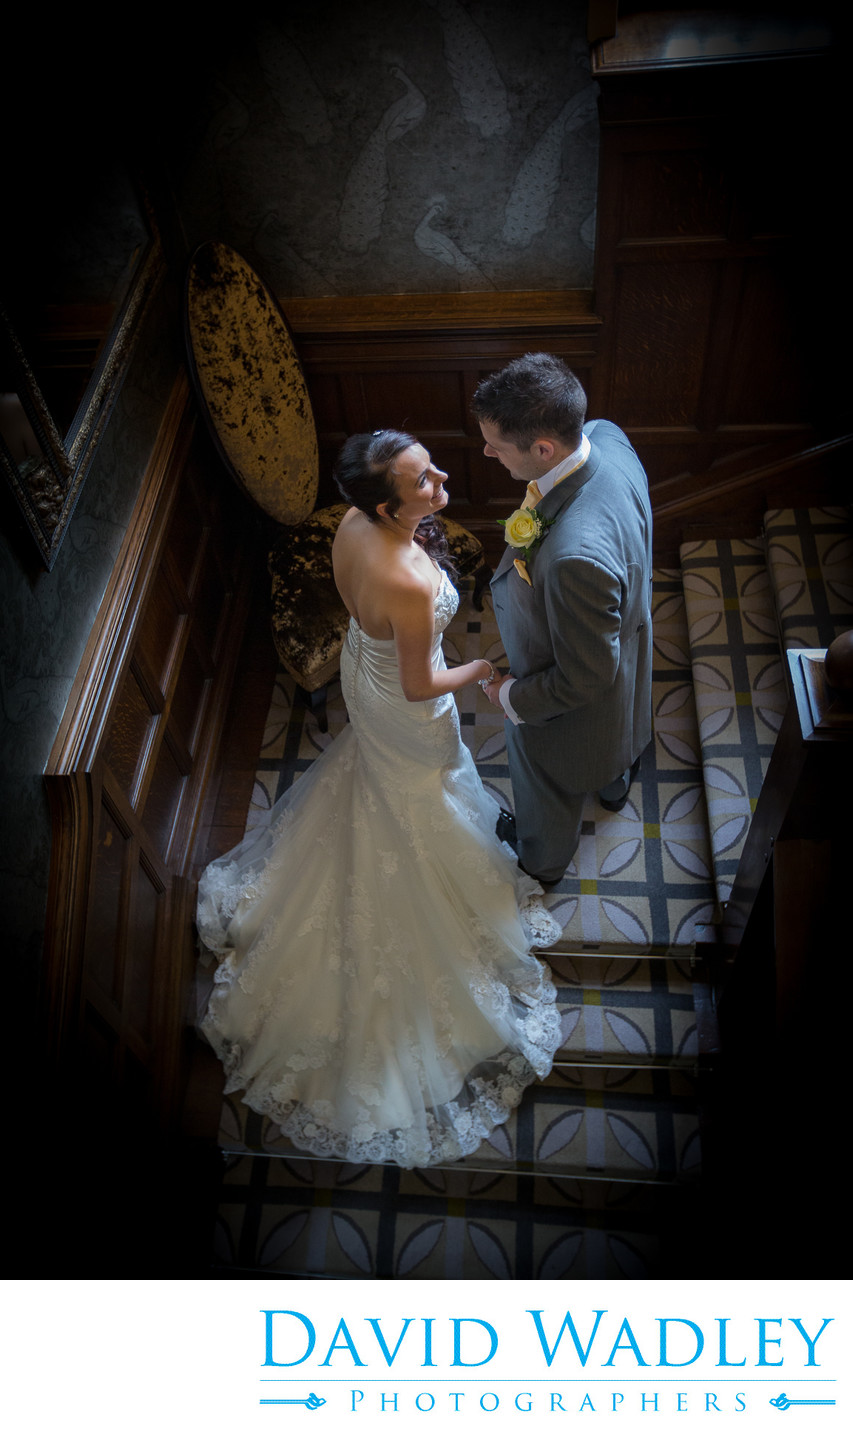 Bride & Groom together photographed in Moxhull Hall Hotel.